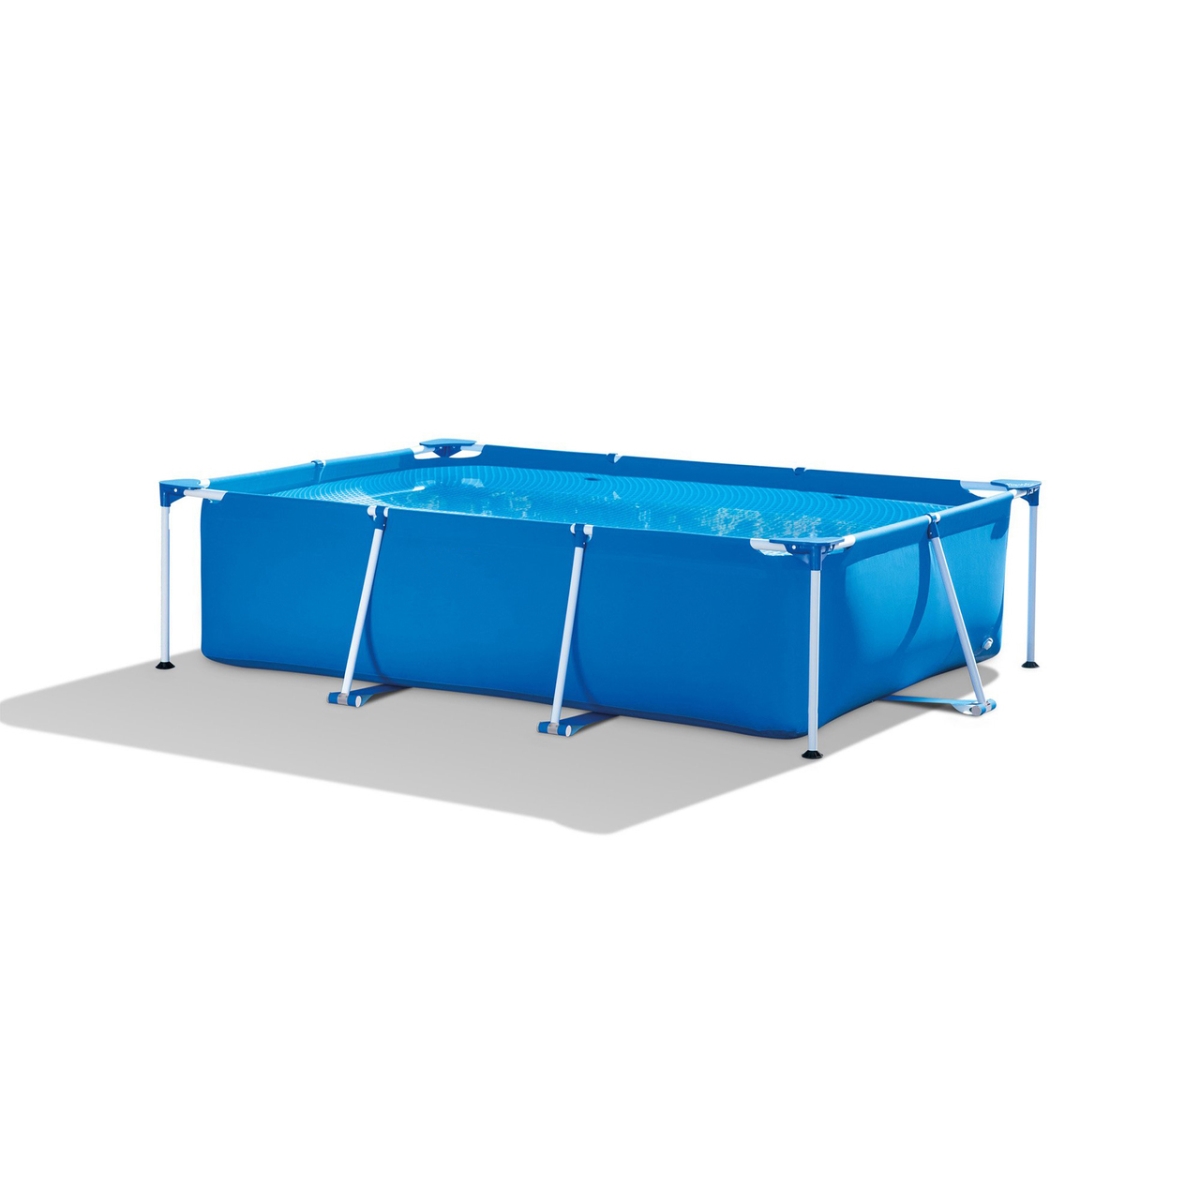 Pool Central 34808716 8.5 ft. x 25 in. Rectangular Frame Above Ground Swimming Pool with Filter Pump